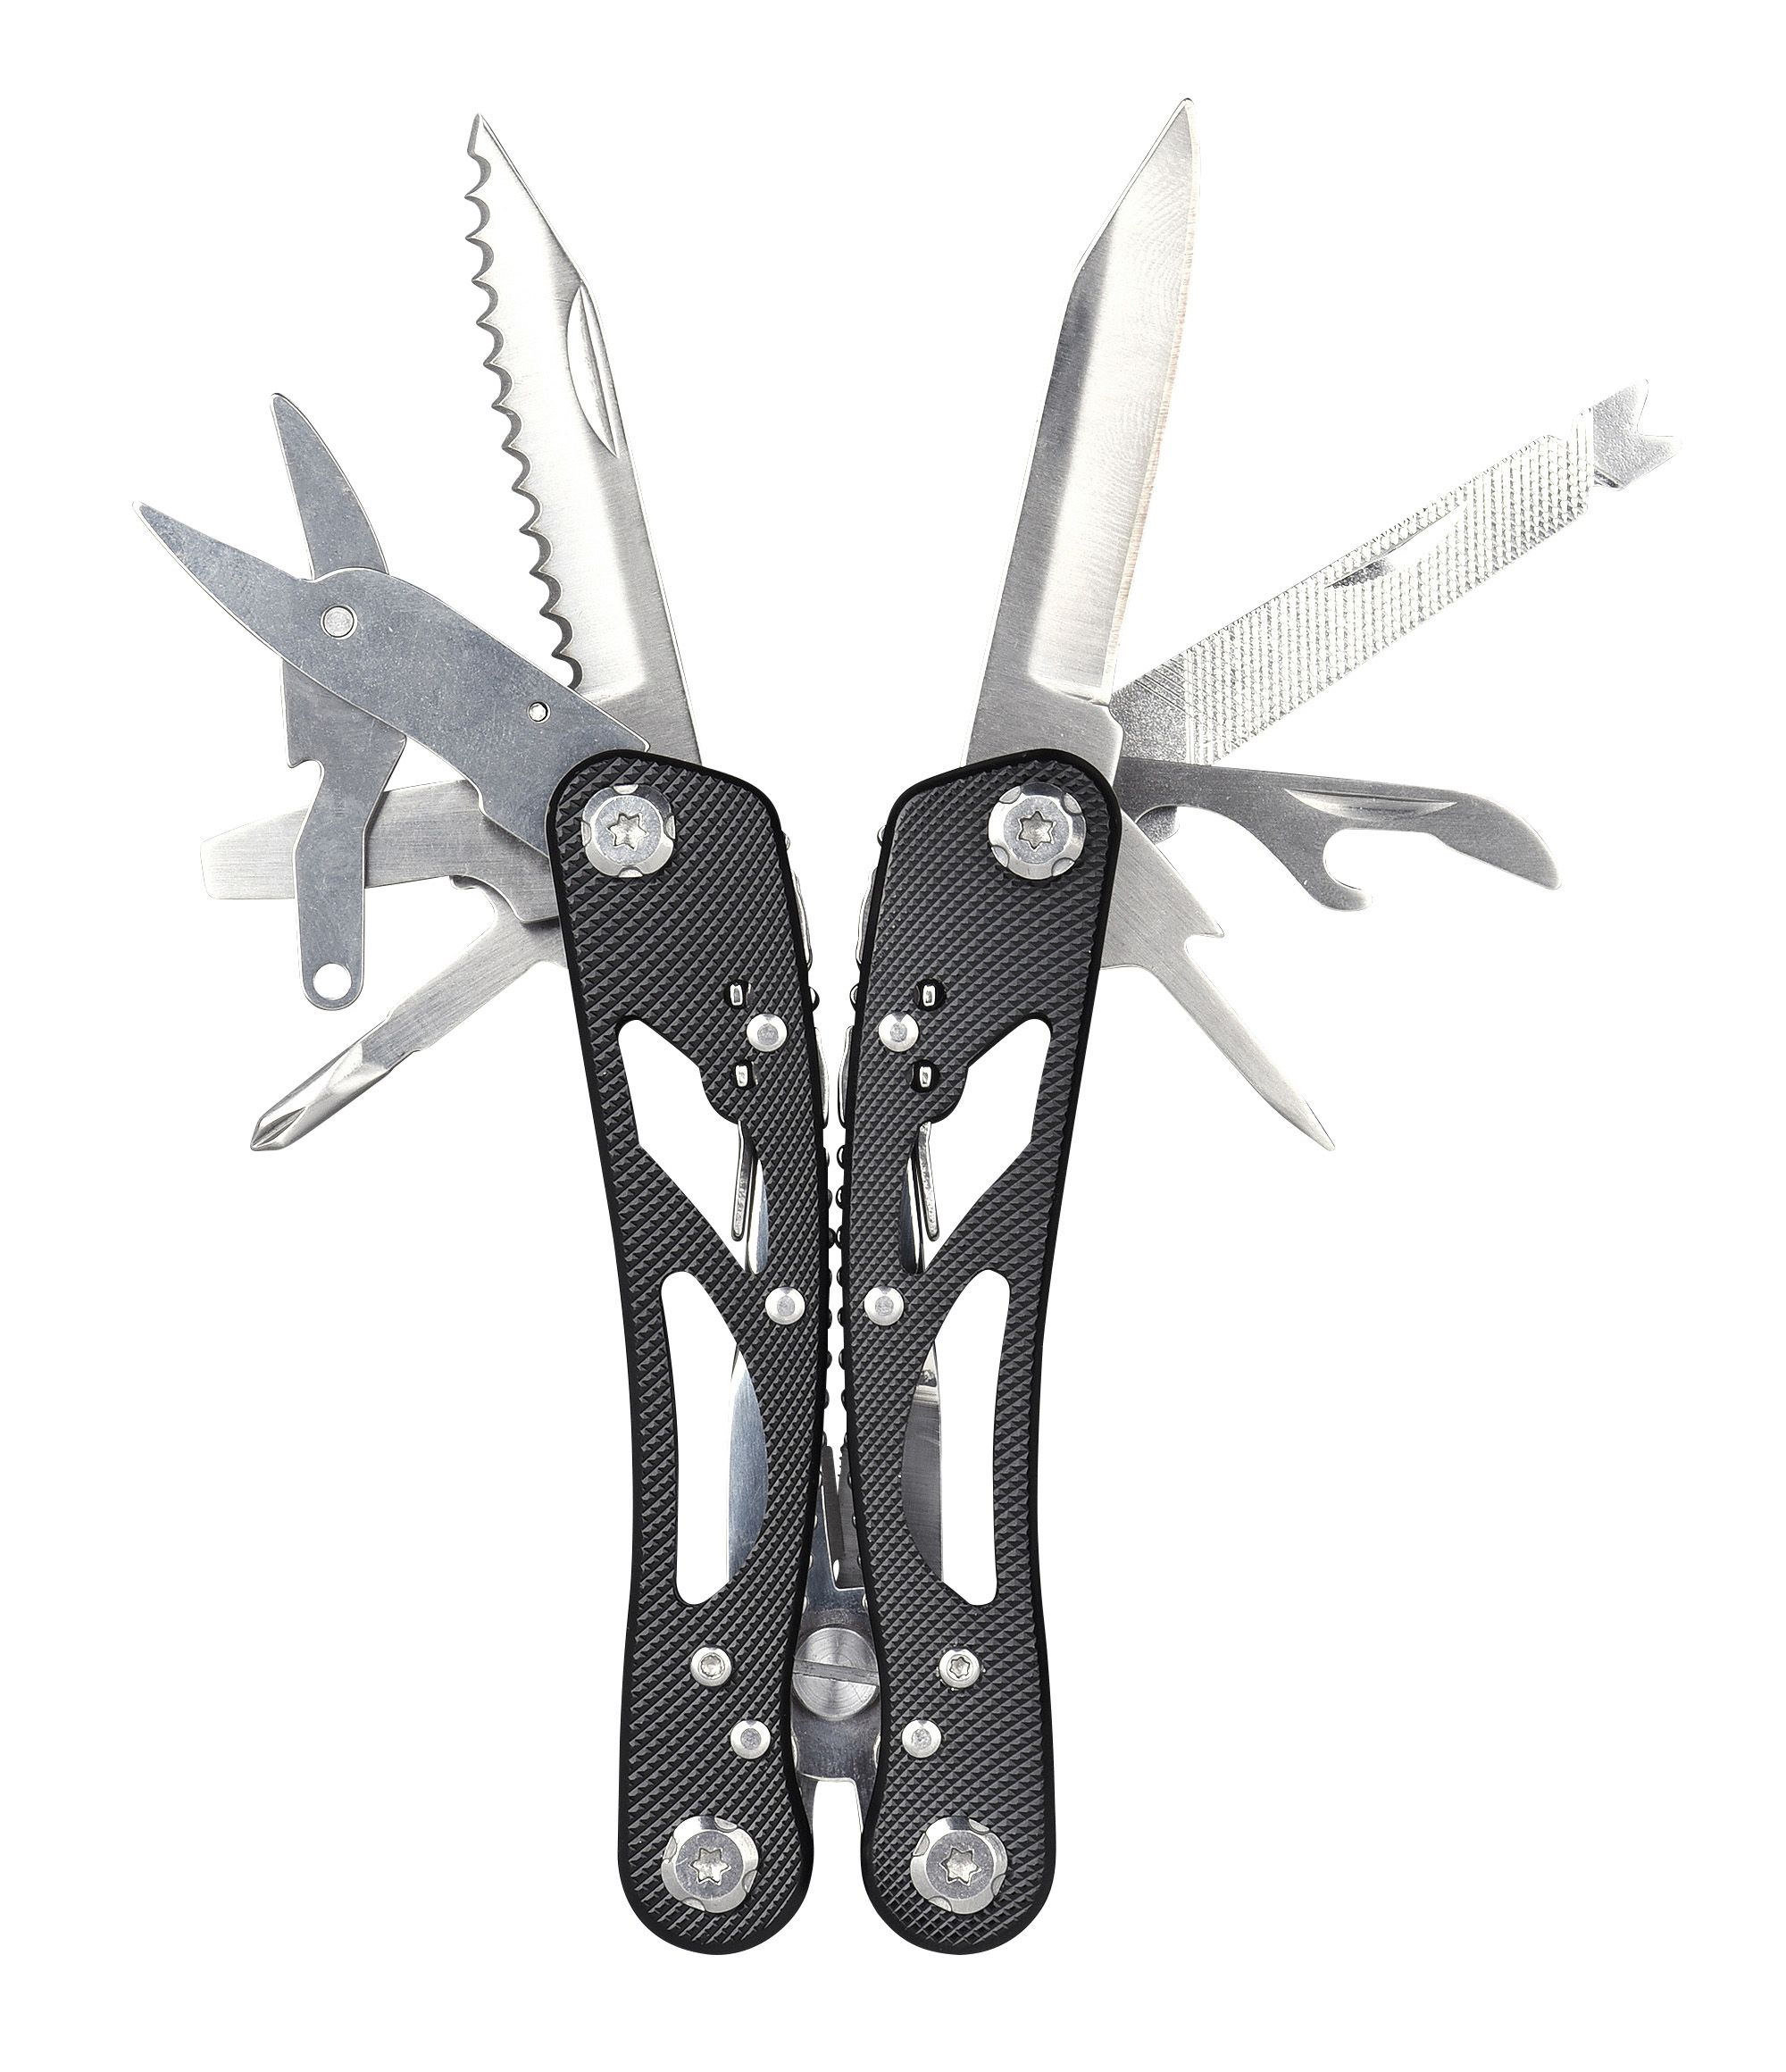 Spro Freestyle Folding Tool 13In1